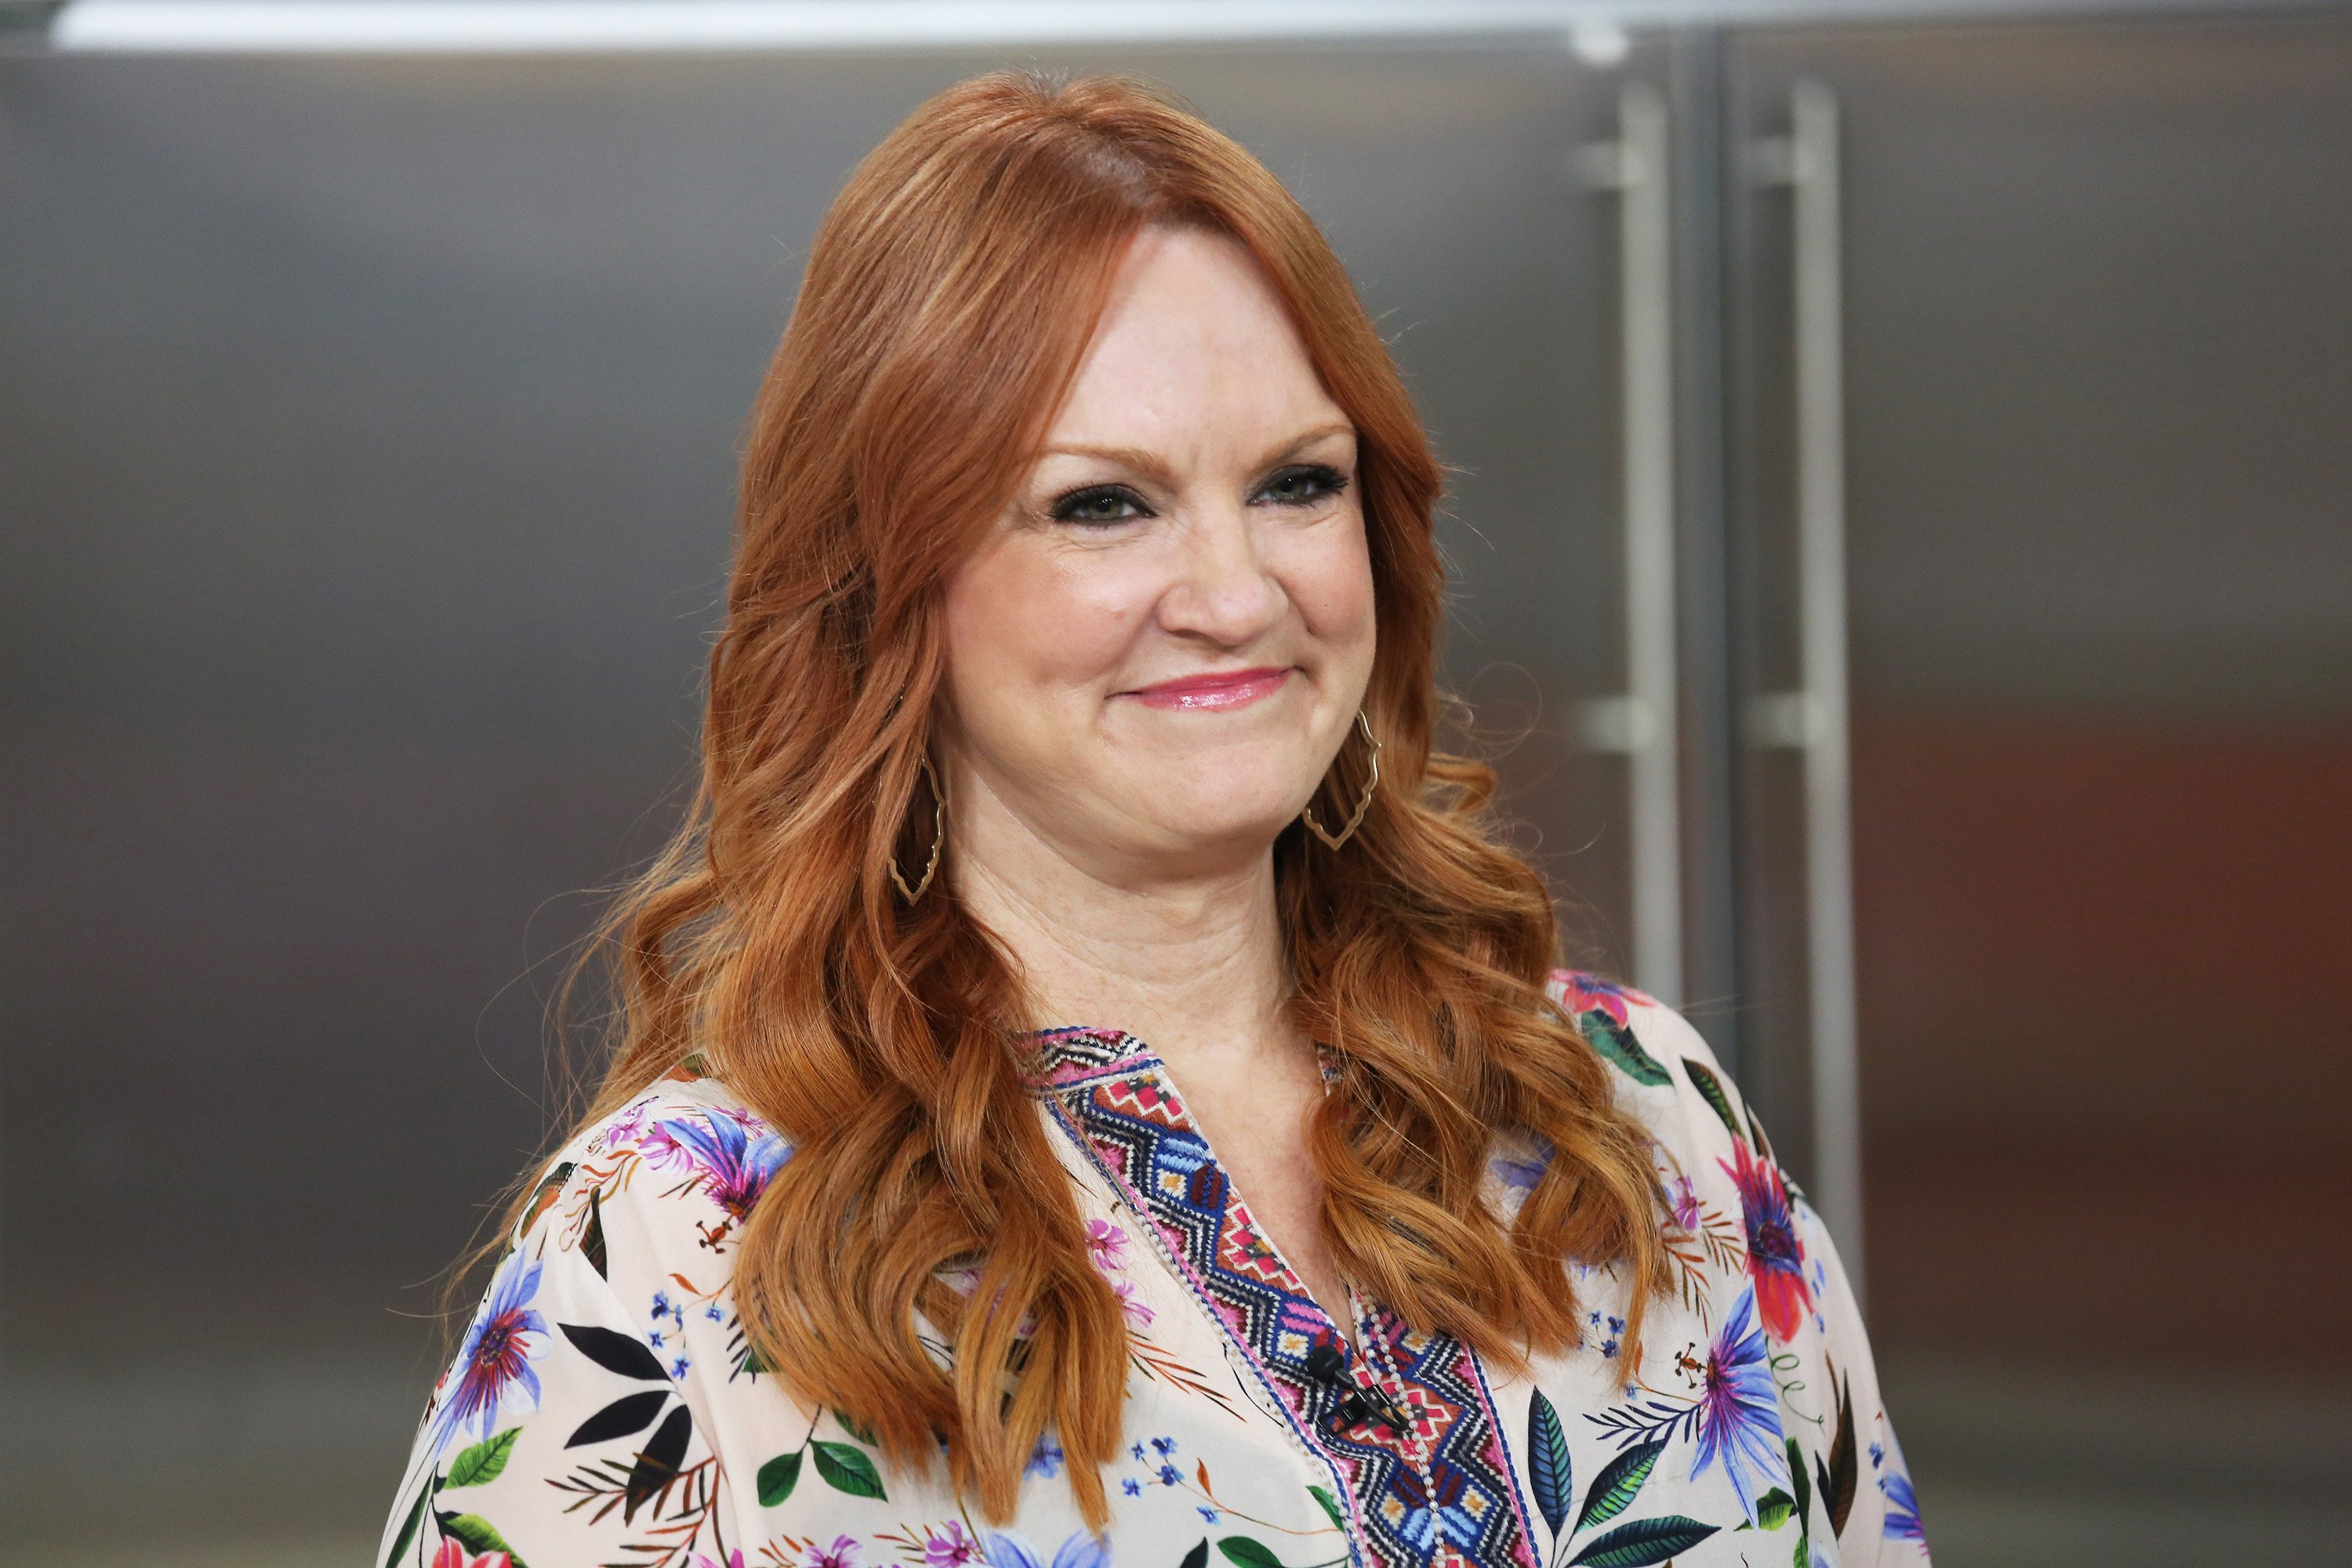 ‘The Pioneer Woman’ Ree Drummond’s Husband Proposed in a Super Casual Way